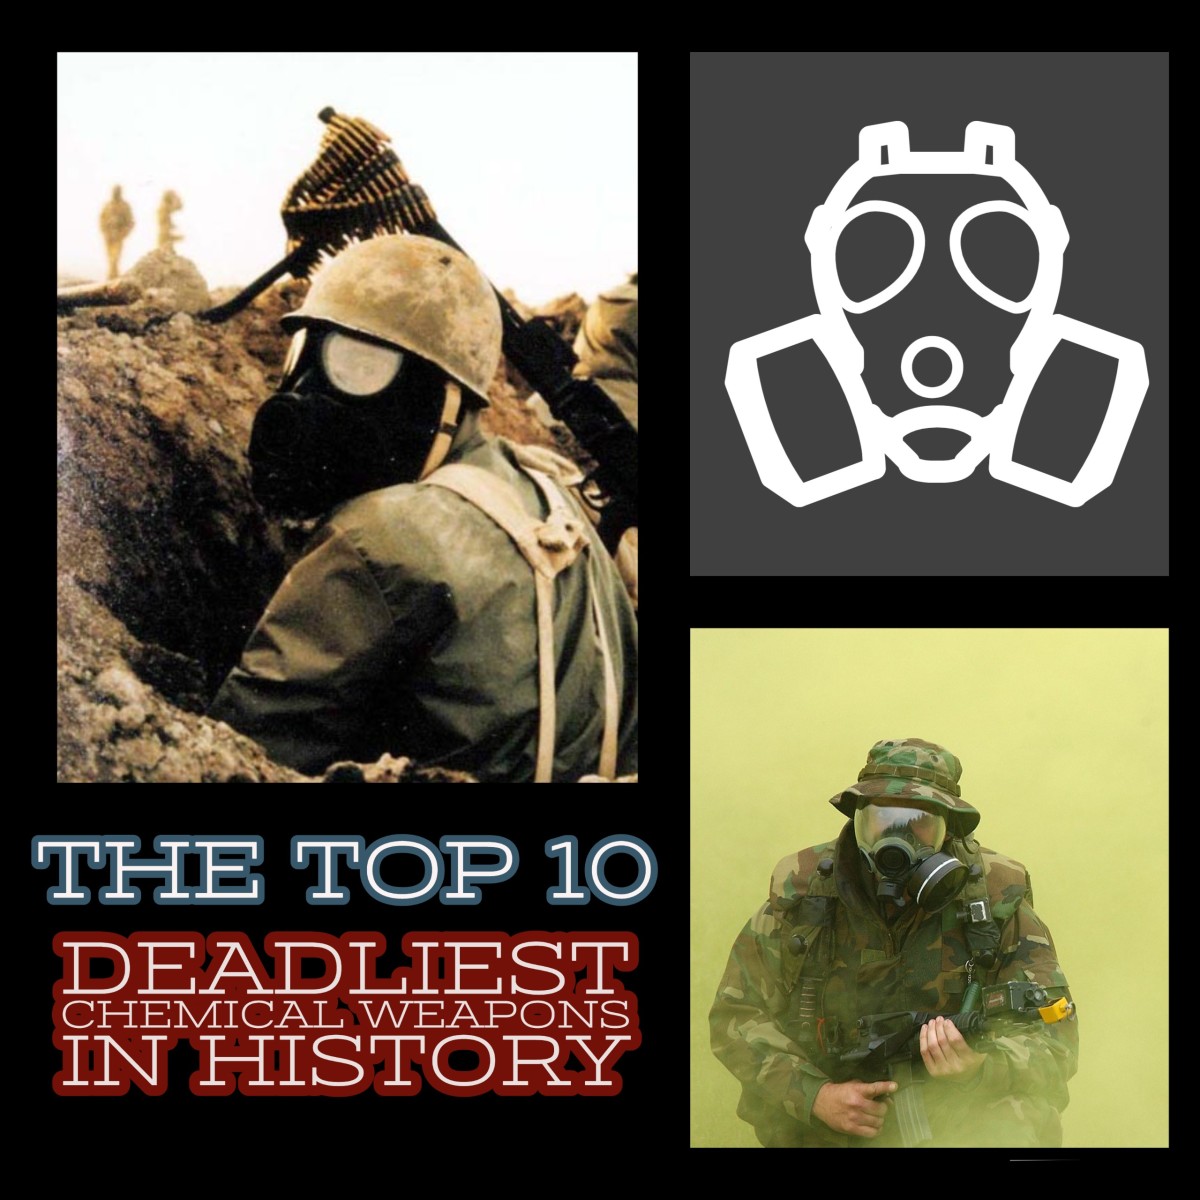 The Top 10 Deadliest Chemical Weapons in History - Owlcation